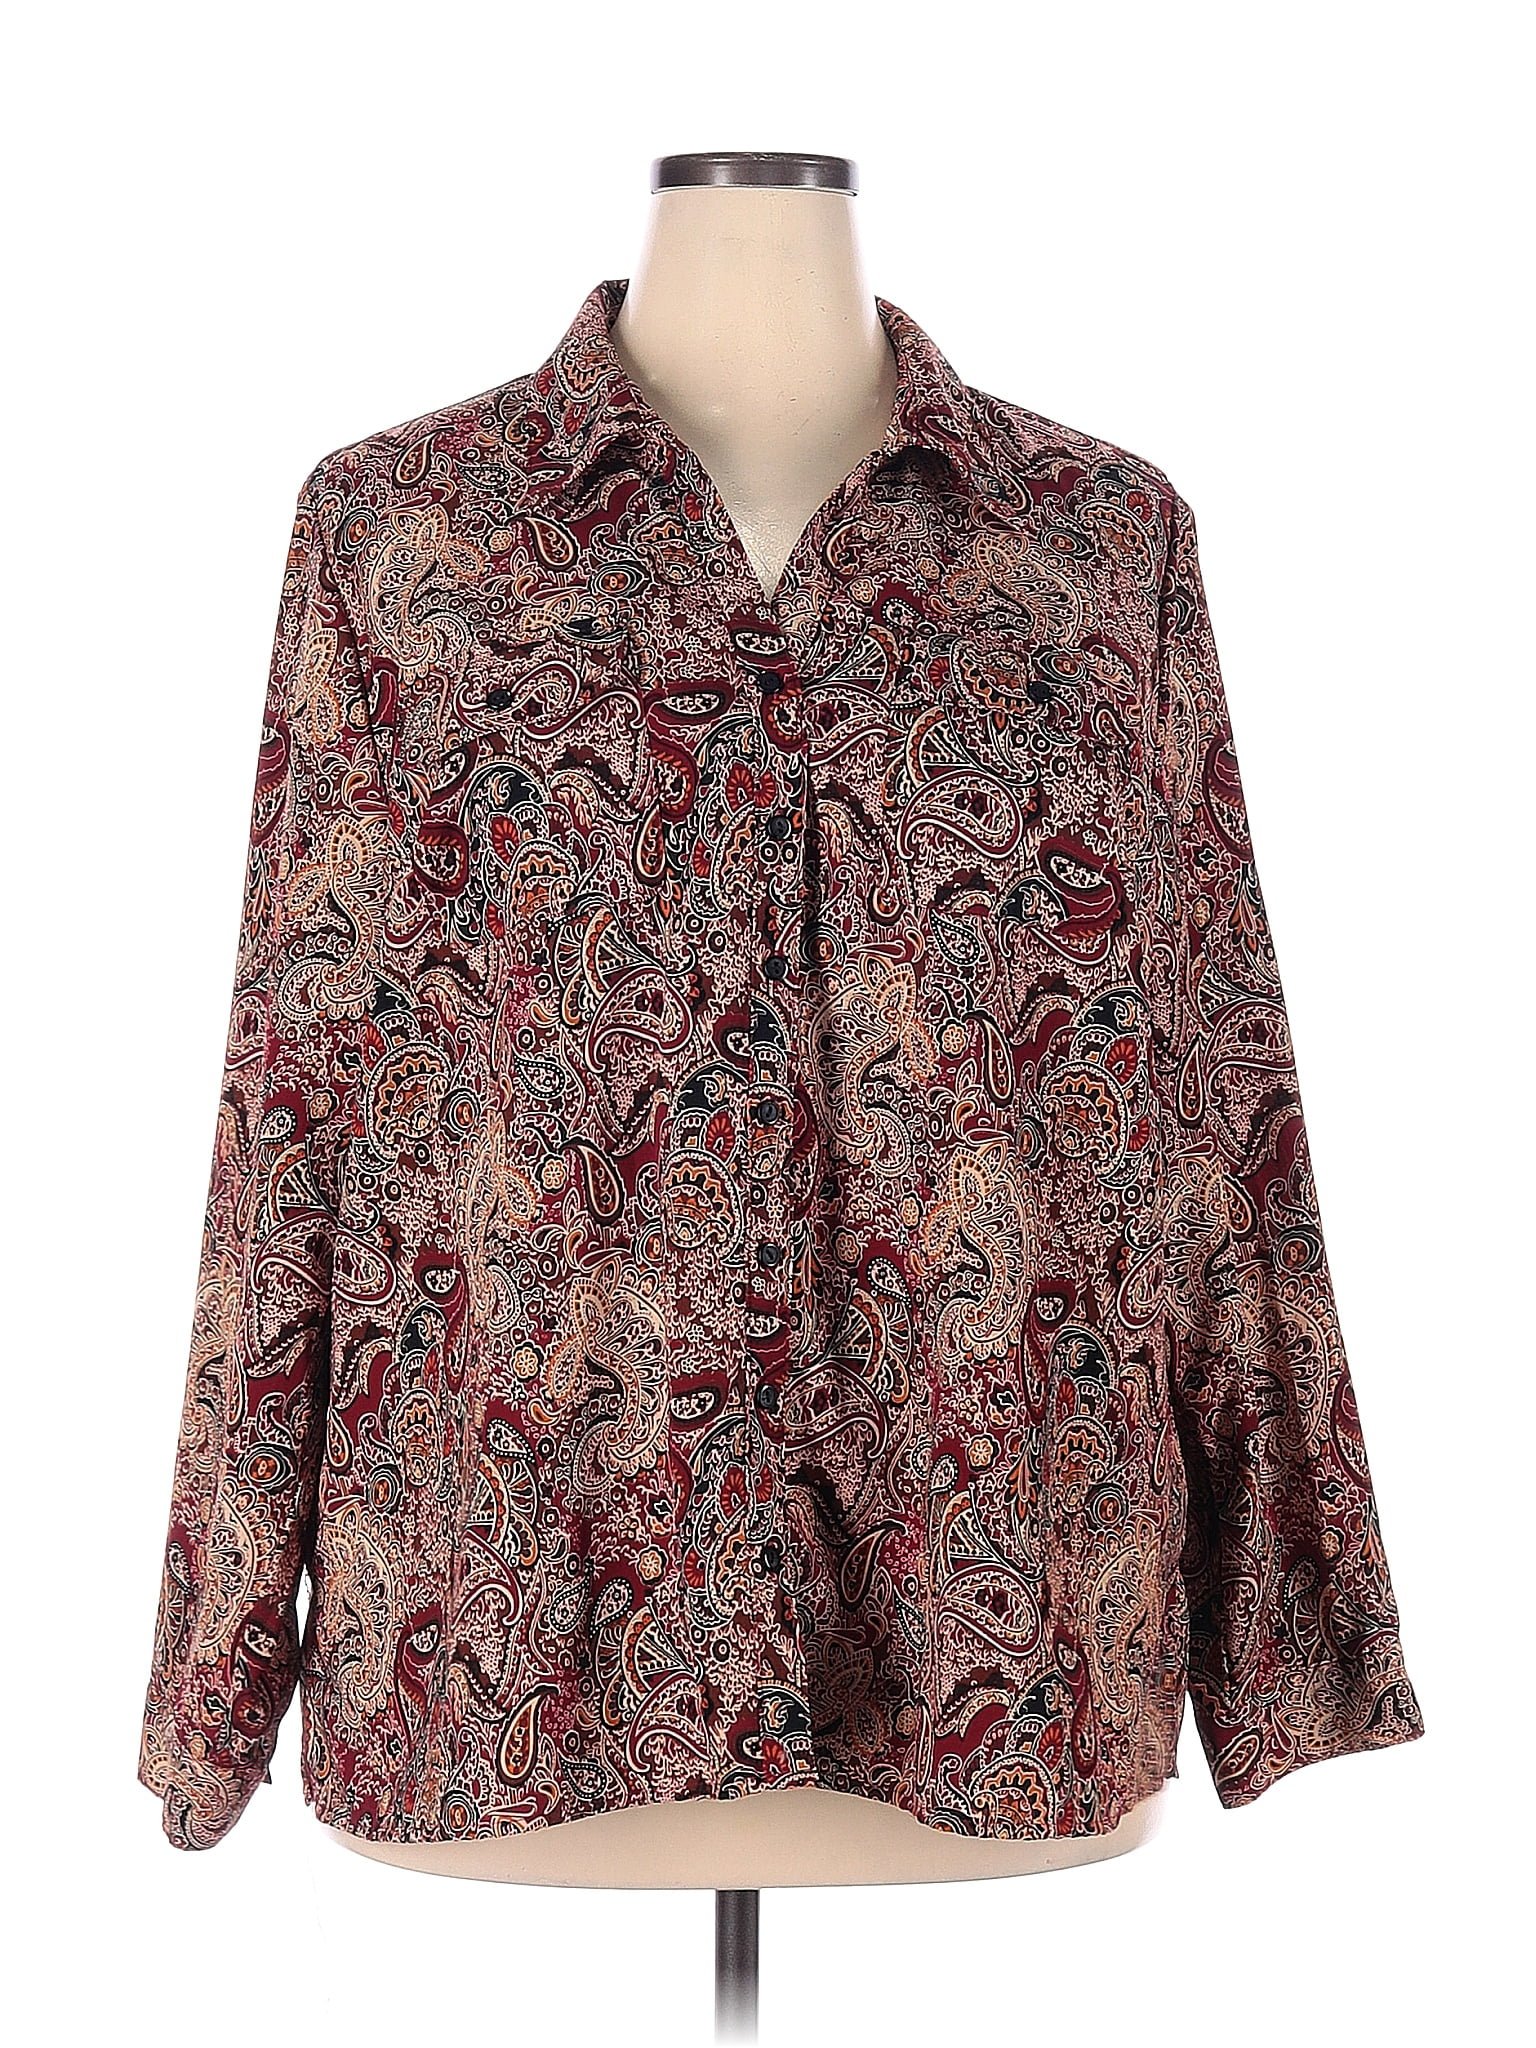 NY Collection Burgundy Long Sleeve Blouse Size 3X (Plus) - 72% off ...